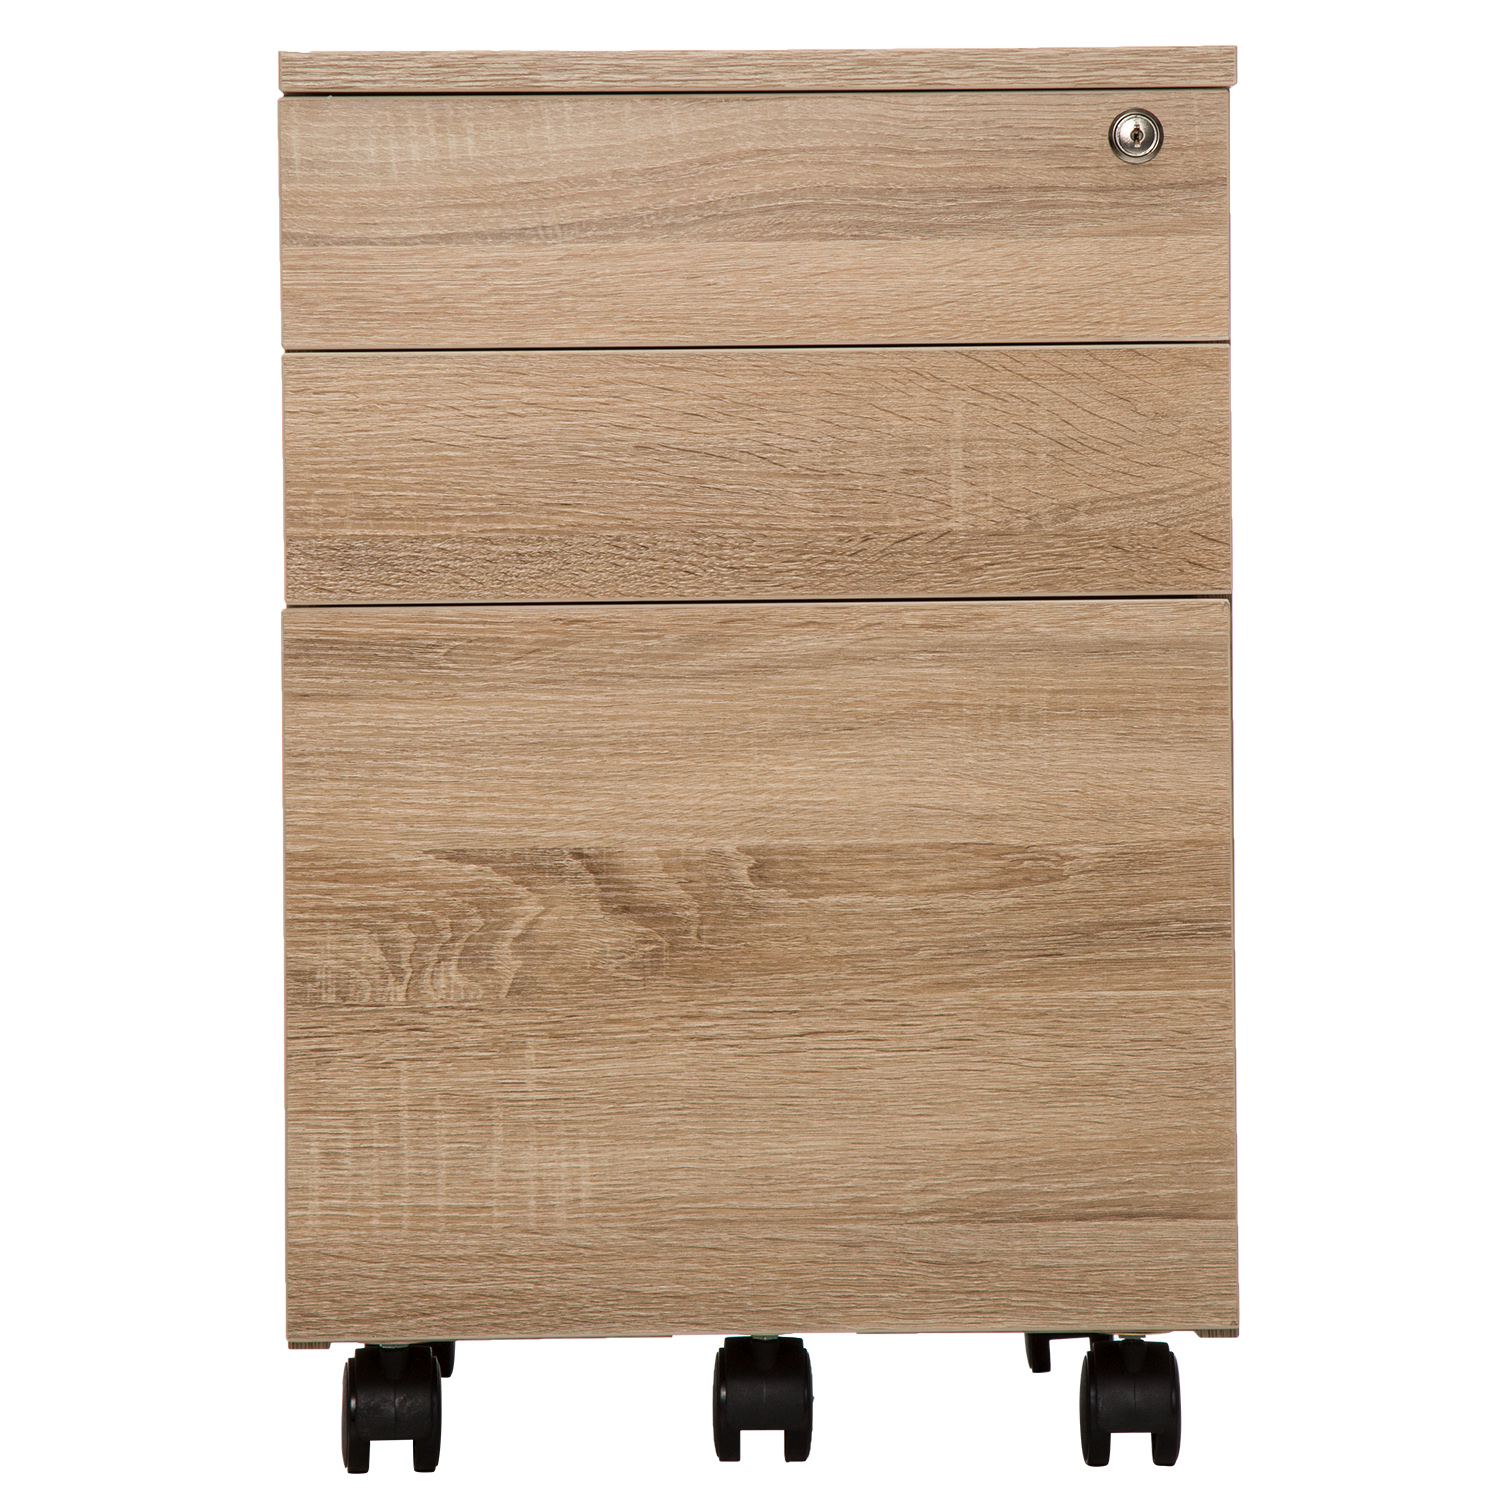 TOPSKY 3 Drawers Wood Mobile File Cabinet Fully Assembled Except Casters S-16A